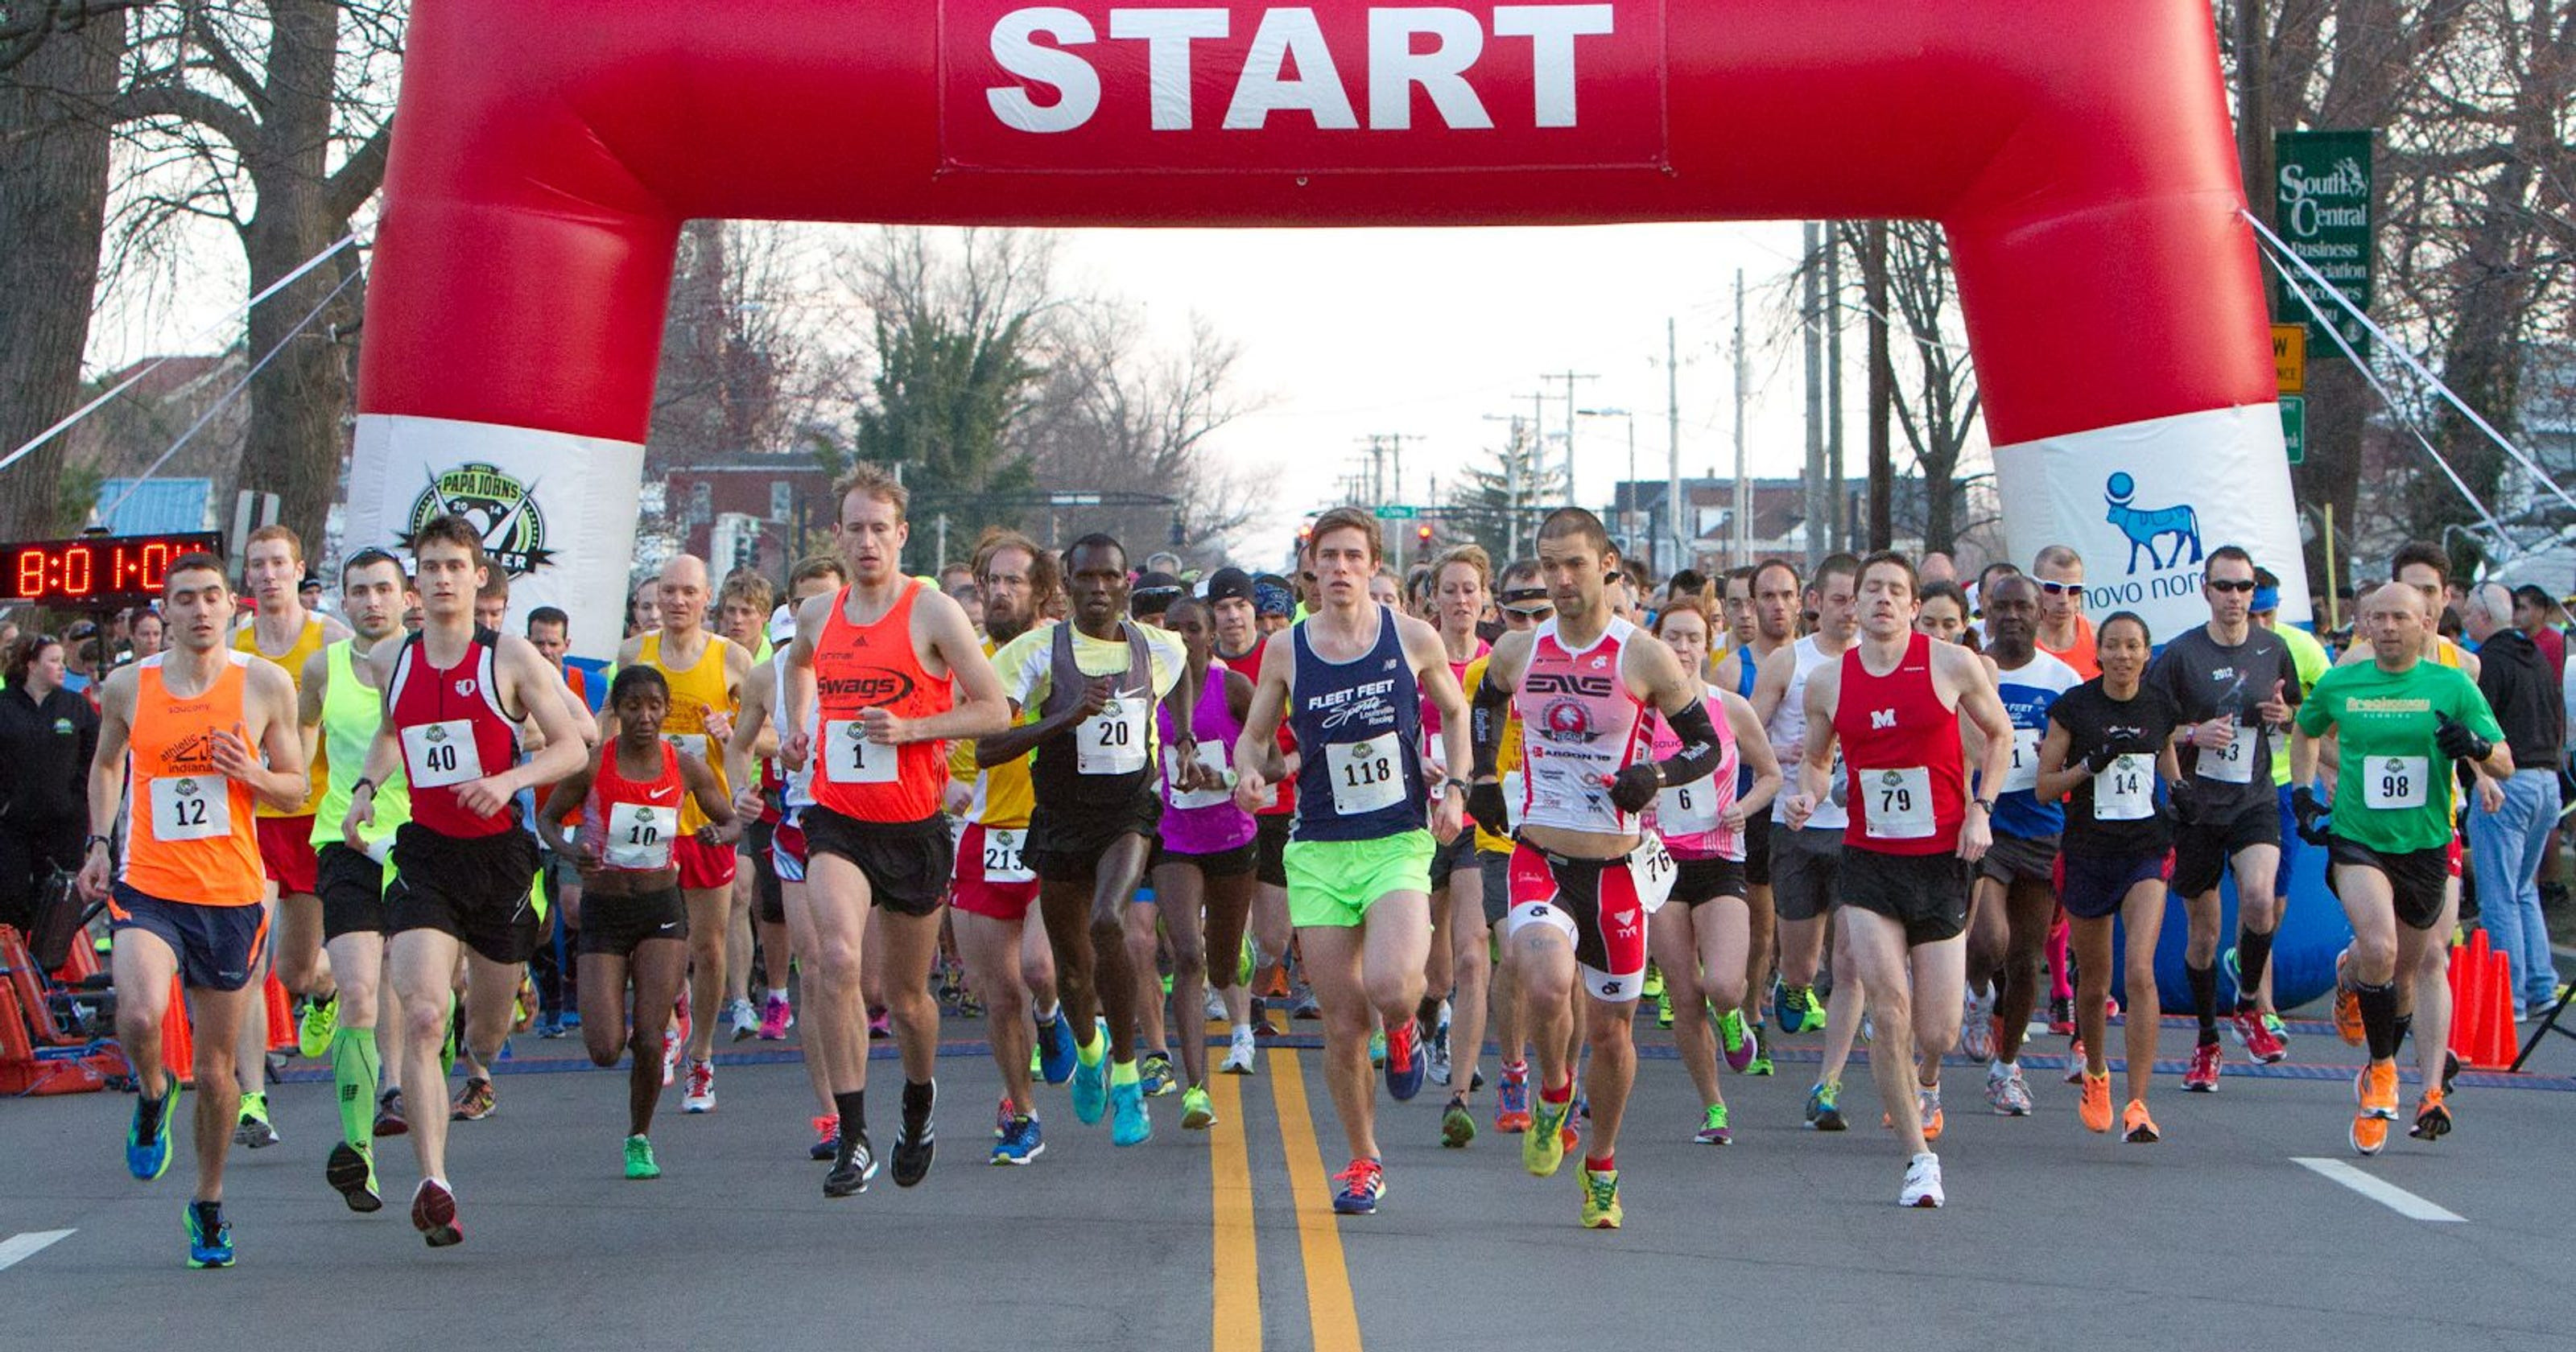 After 35 years, the Louisville Triple Crown of Running race series has